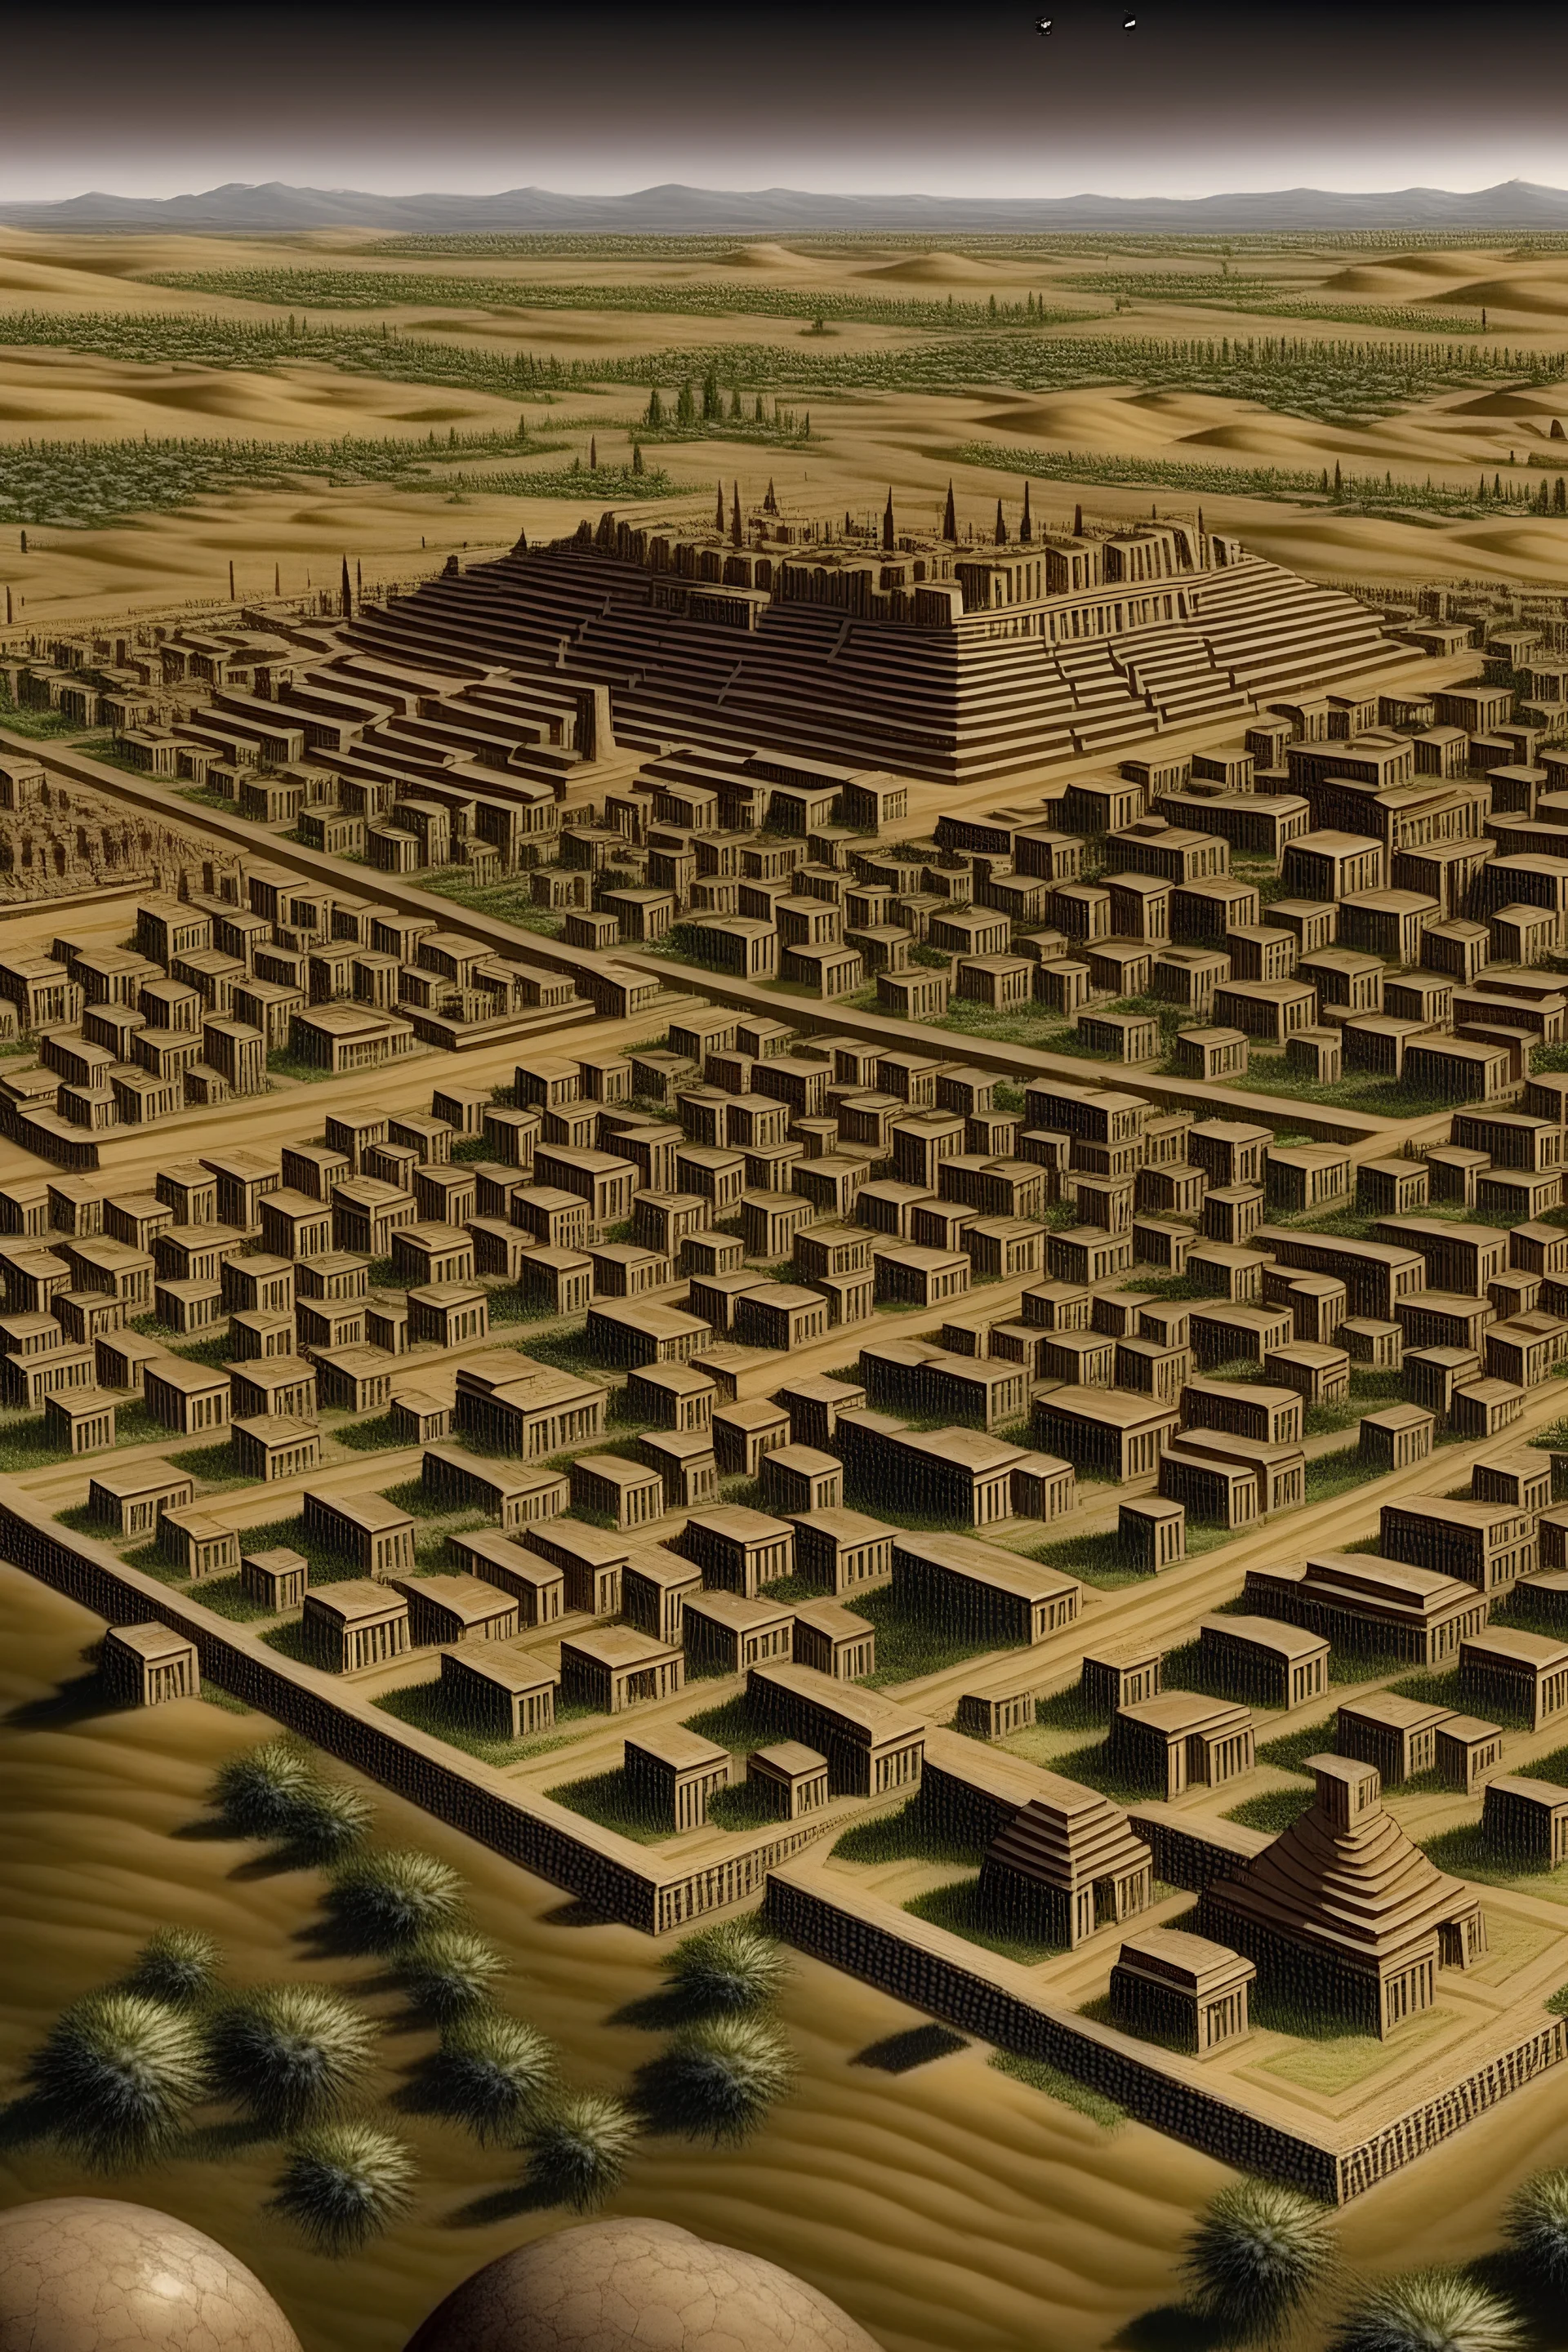 The formation of cities is an intriguing part of human history. In various places like Mesopotamia, Asia, and the Americas, the first cities appeared a long time ago. These early cities were different in many ways. The oldest cities we know about started in Mesopotamia around 7500 BCE. Some of these were Eridu, Uruk, and Ur. Over in the Indus Valley, there was a city called Mohenjadaro, which existed around 2600 BCE. It was one of the biggest cities back then, with over 50,000 people living ther